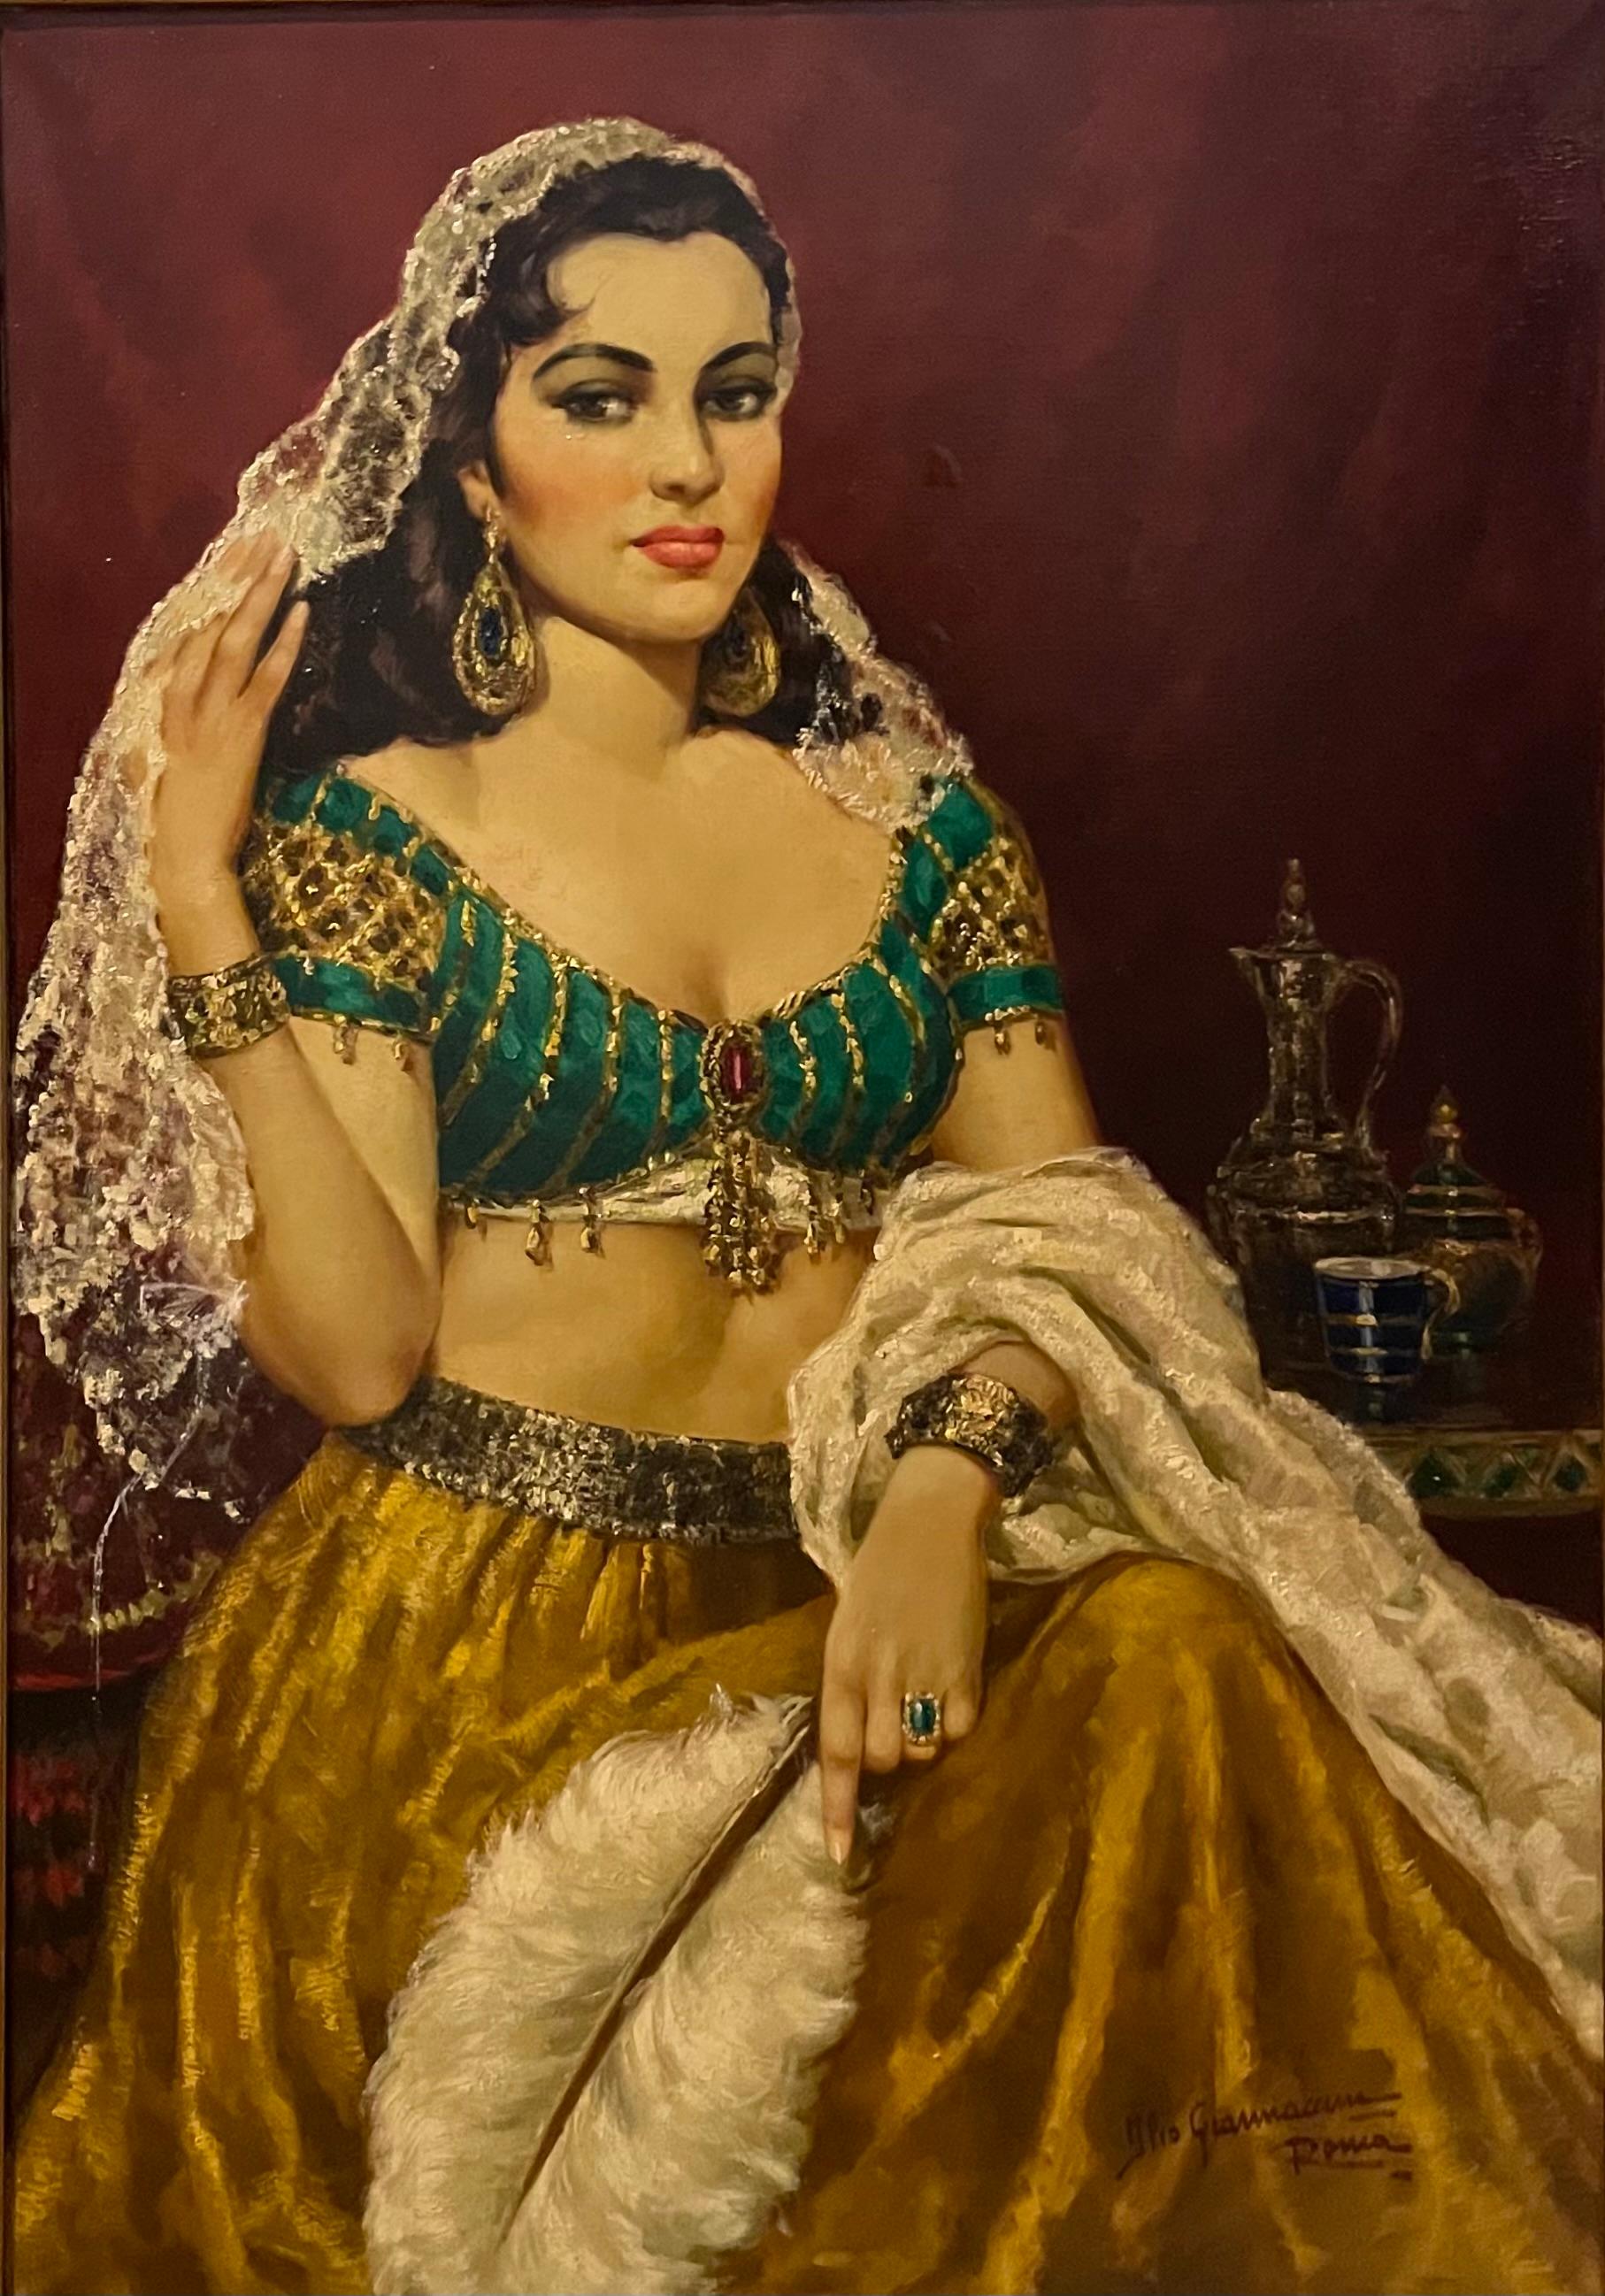 Unknown Portrait Painting - Untitled (Portrait of a Belly Dancer)